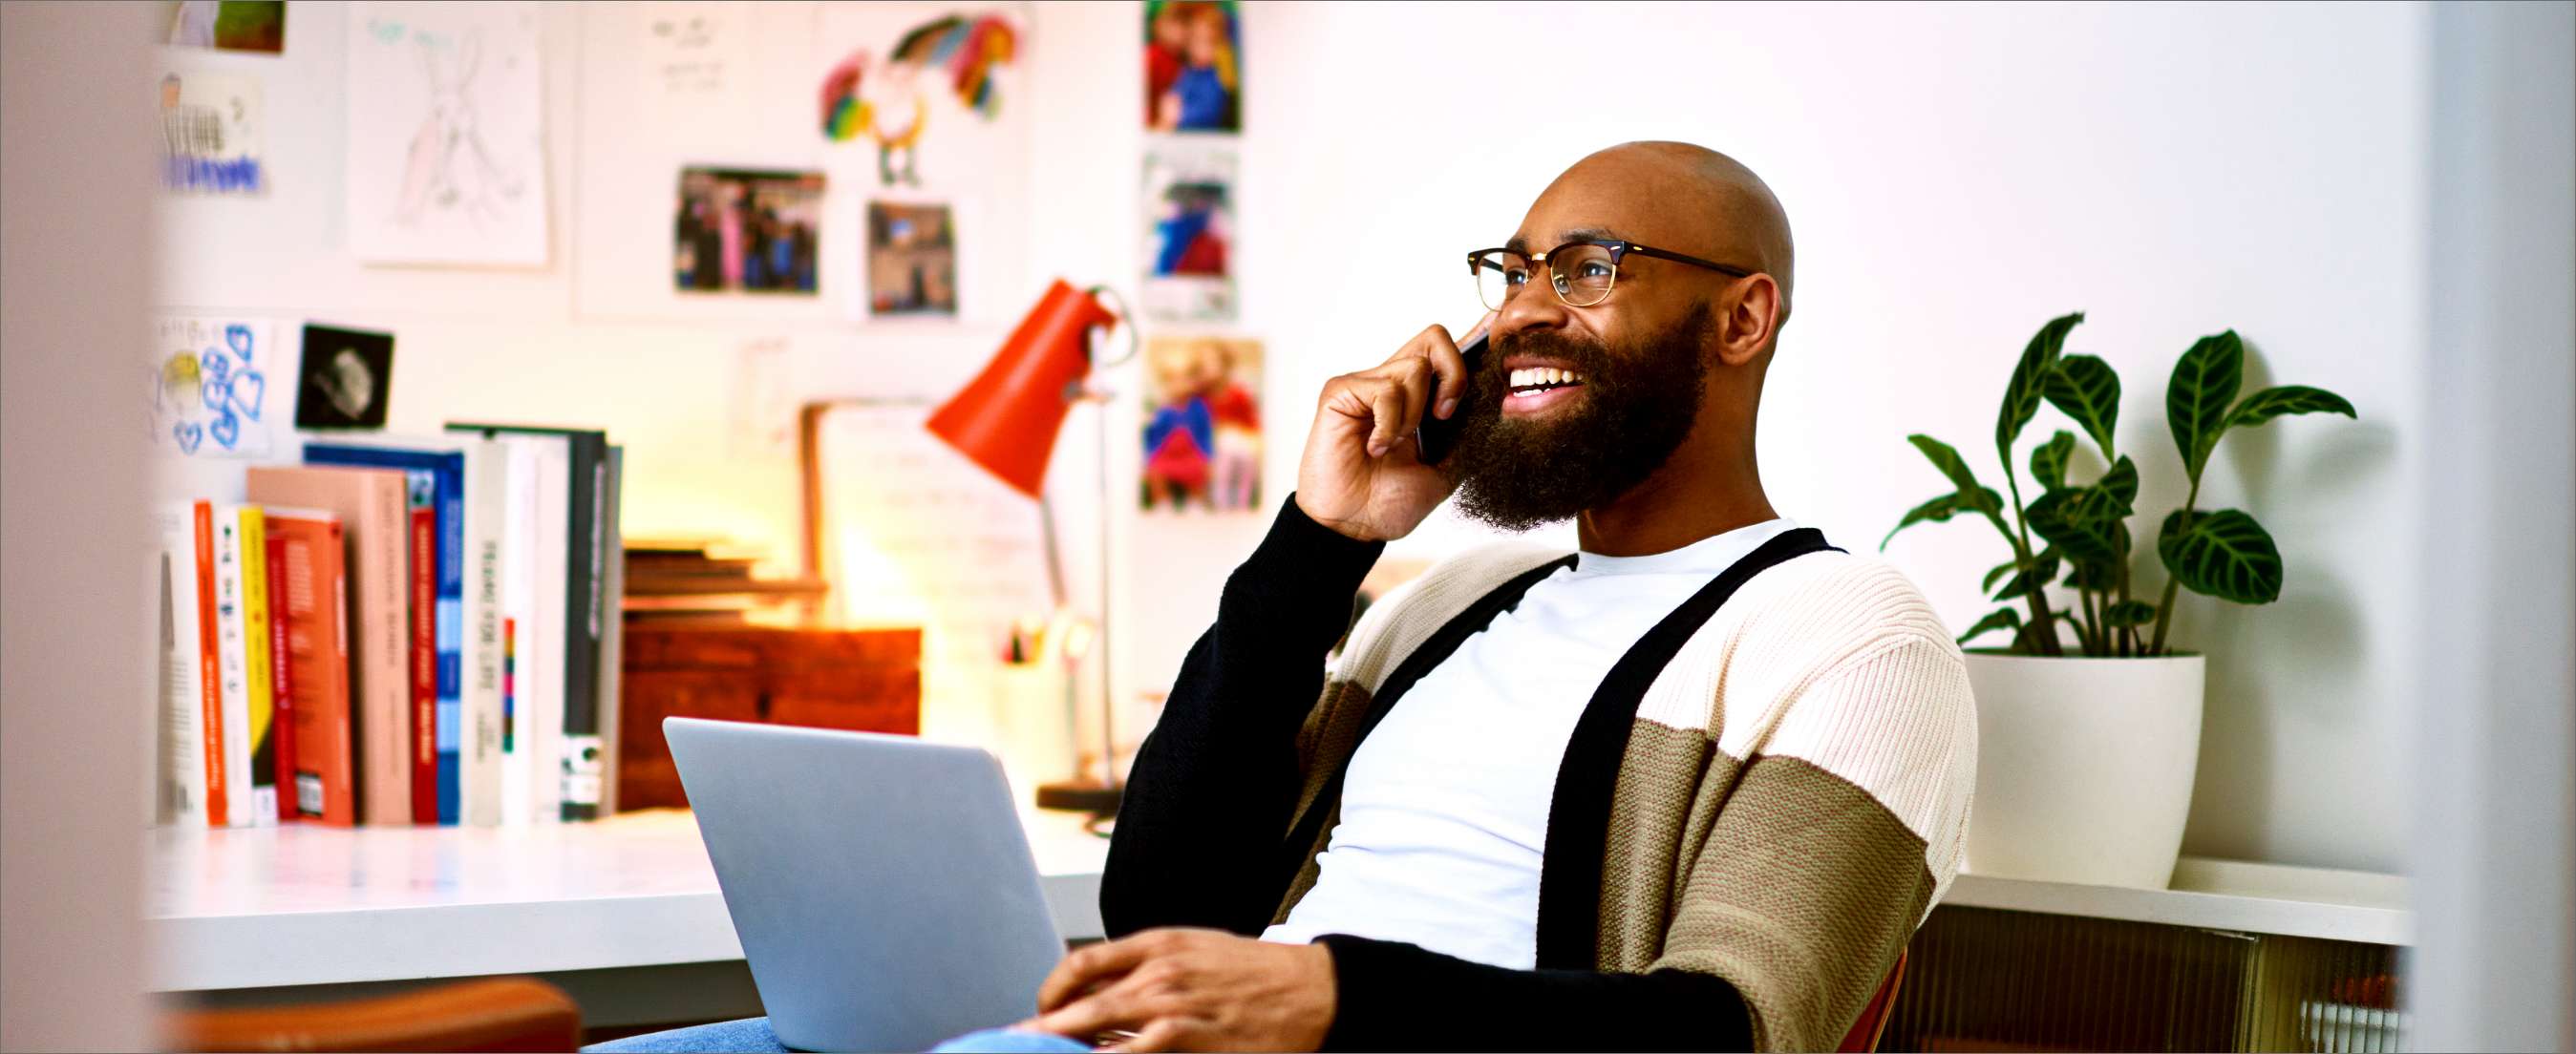 Black man in his 30s sitting on chair with laptop, on phone call.